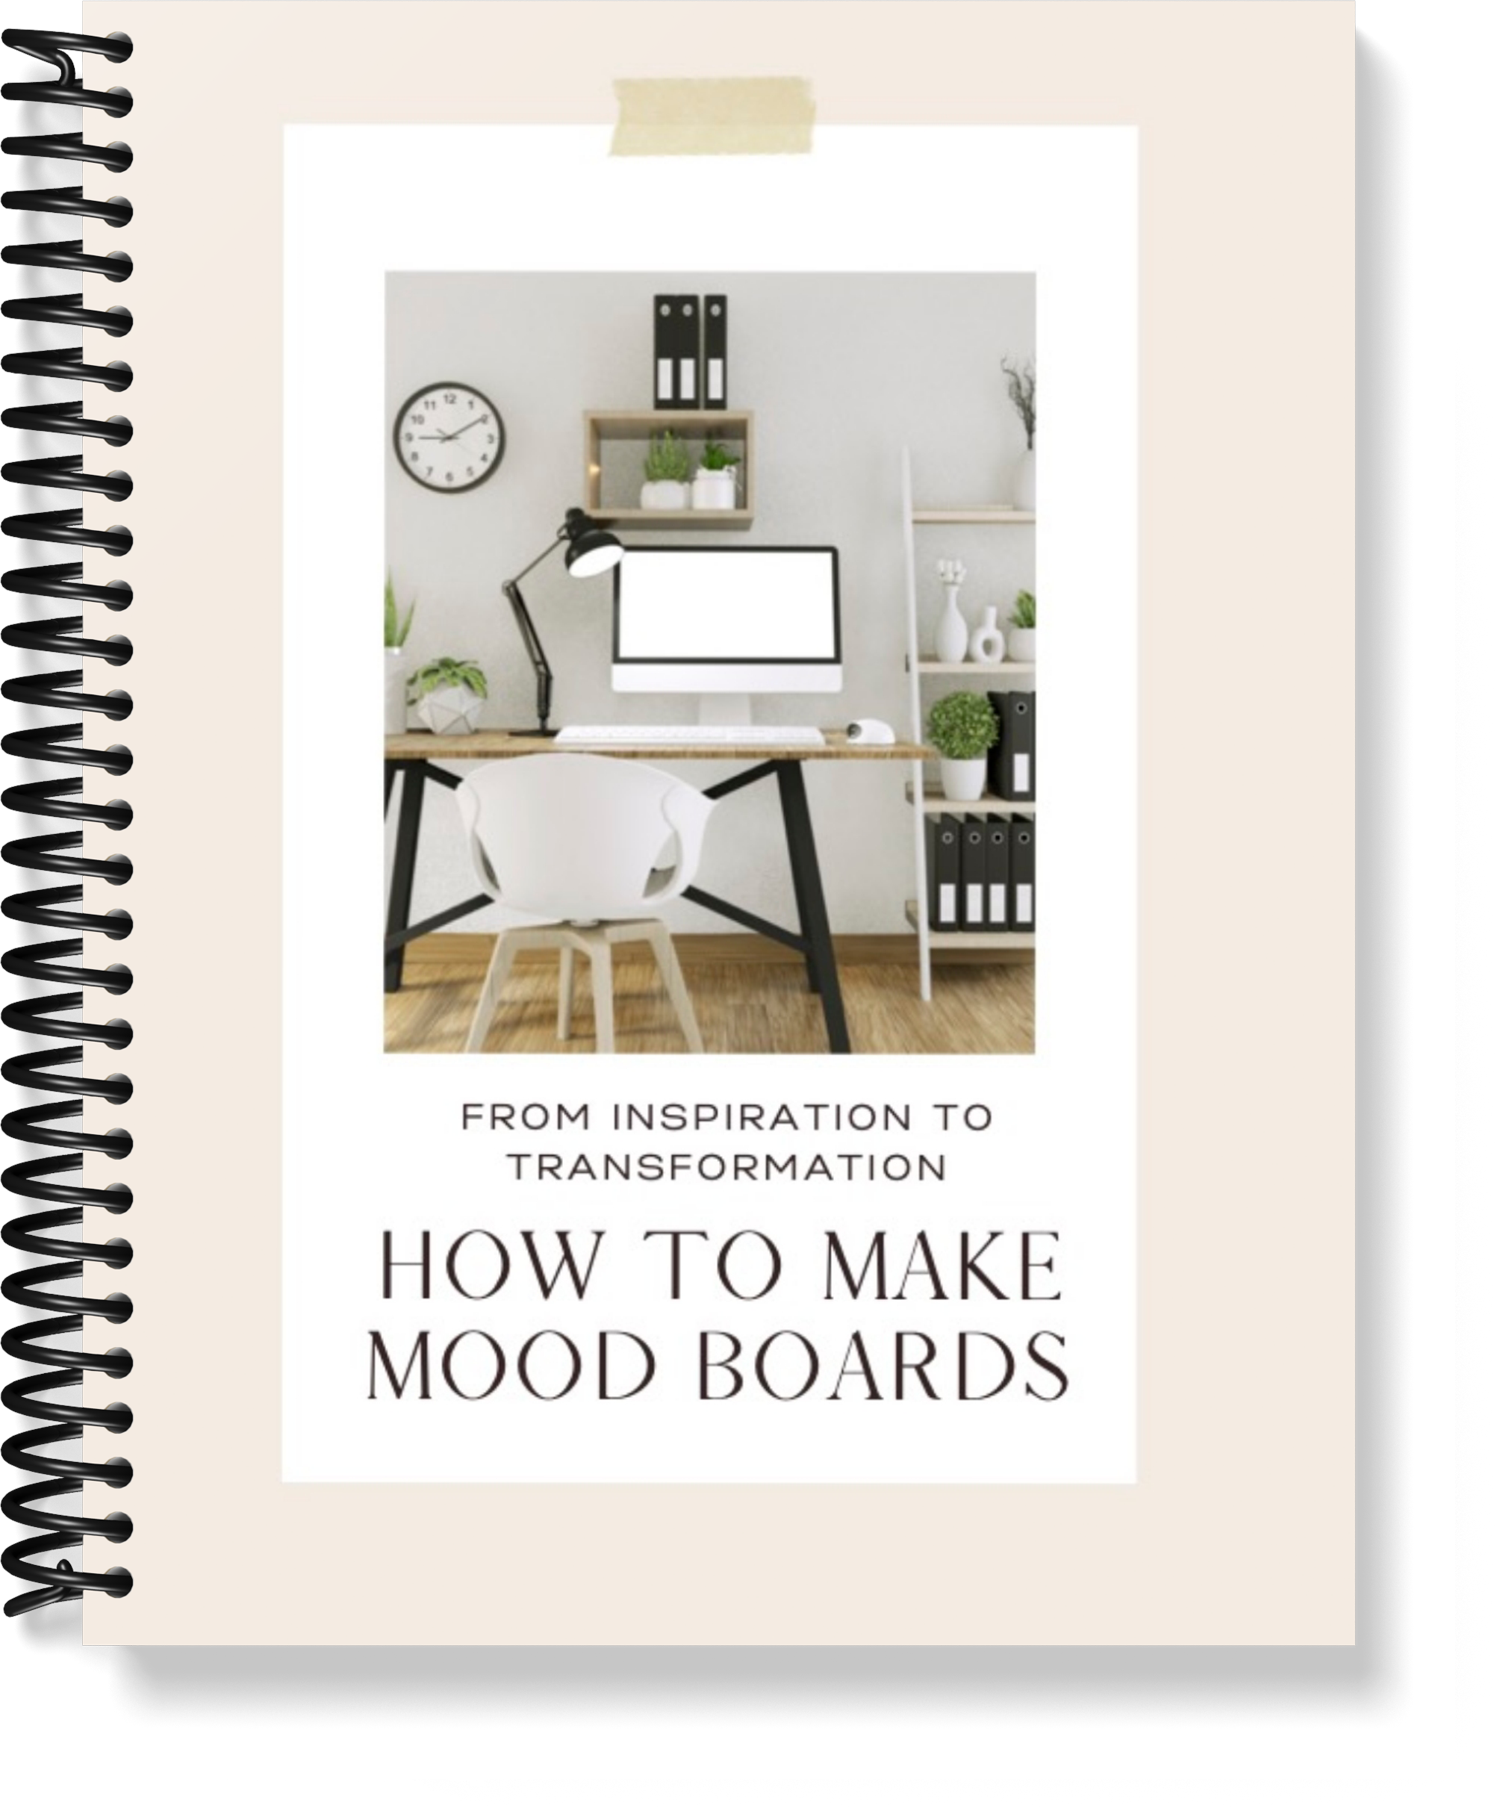 How to Make Mood Boards workbook cover